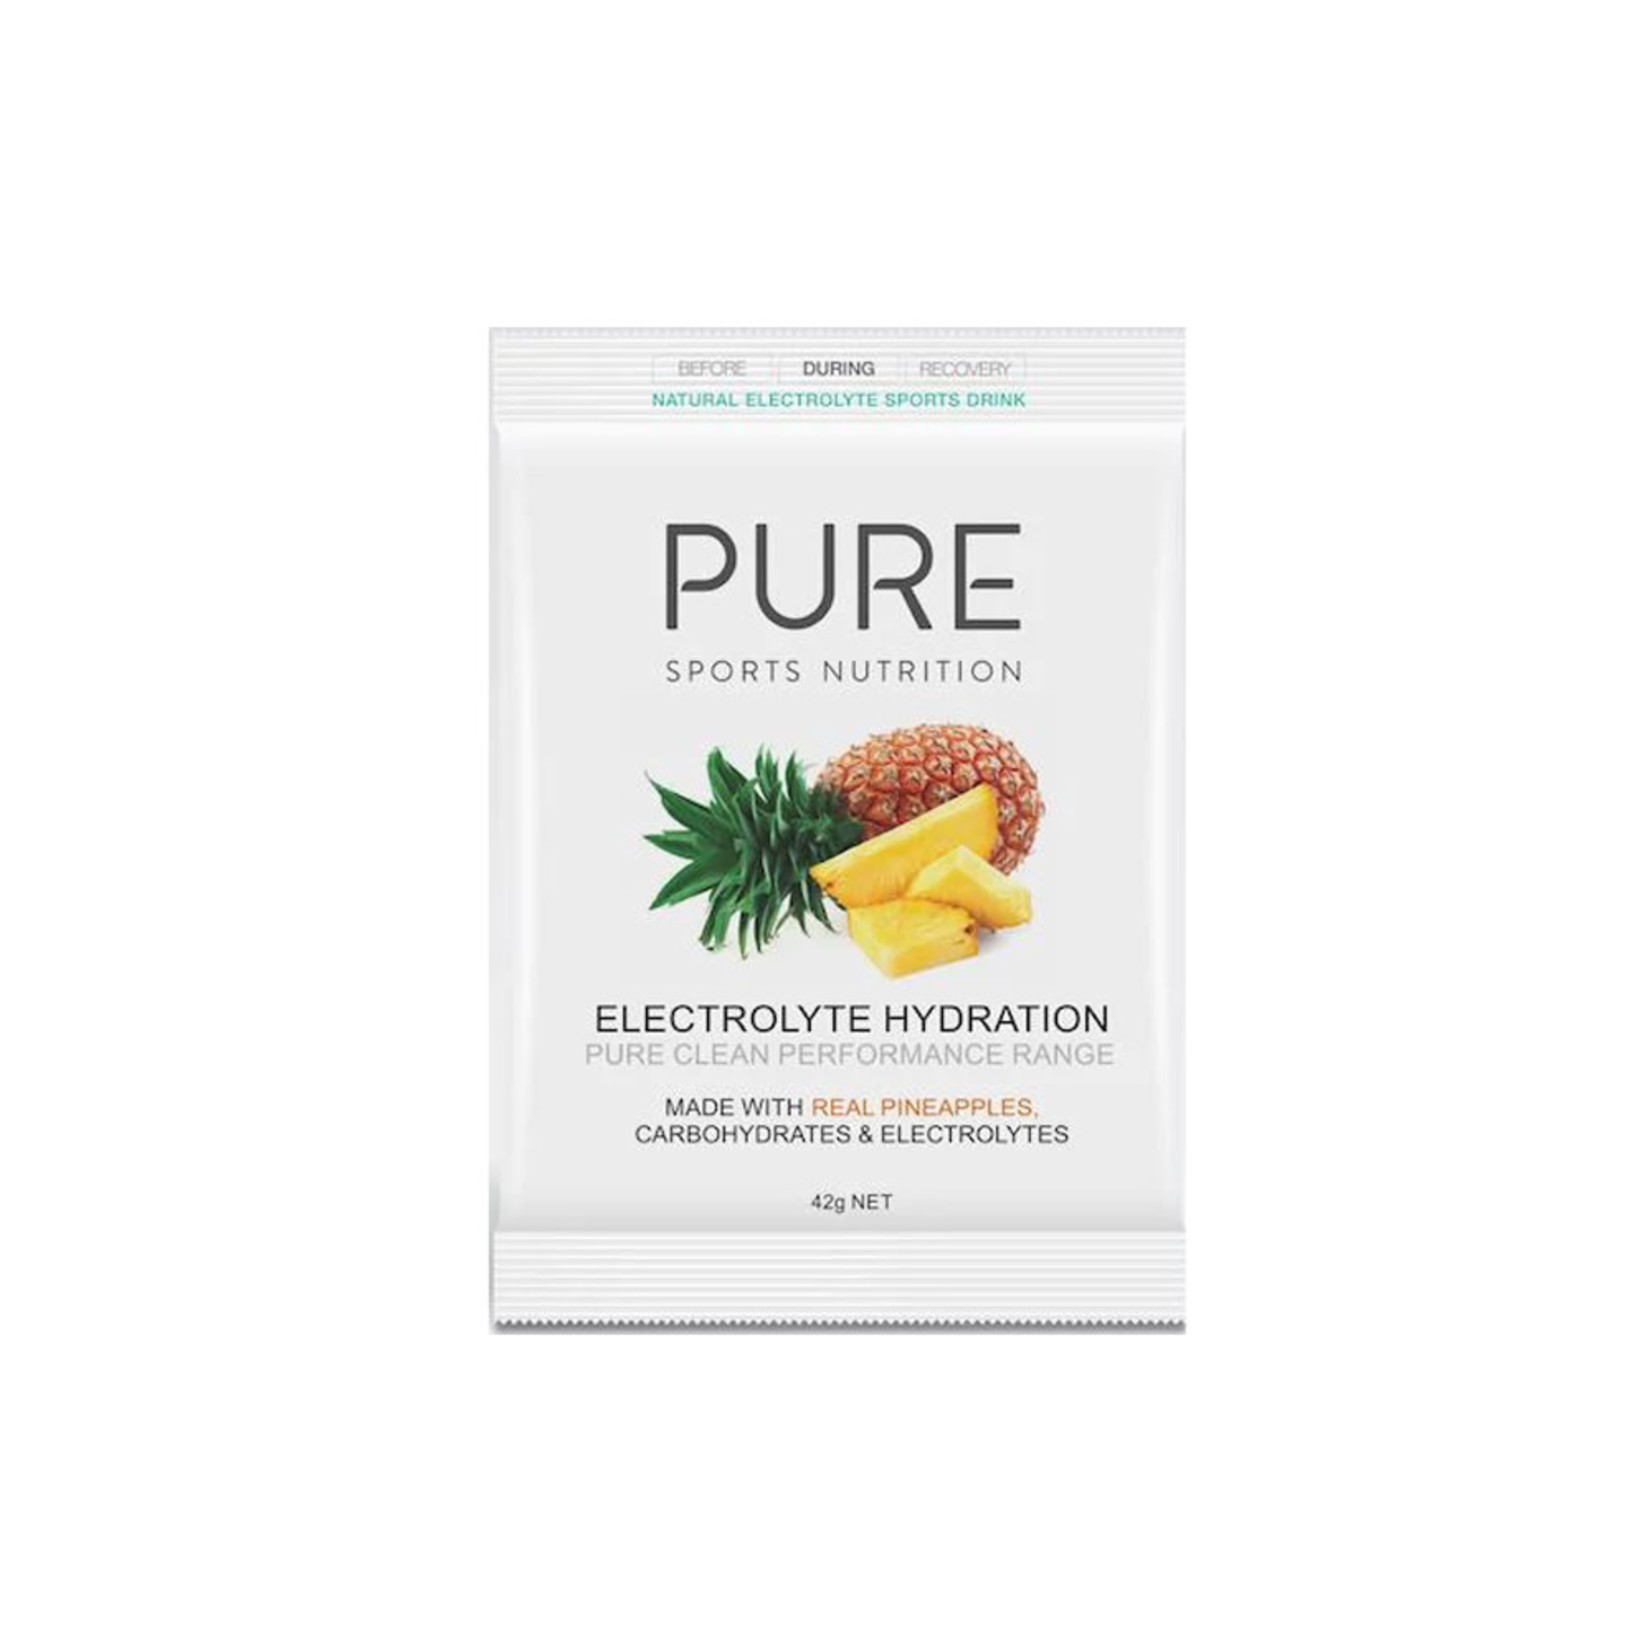 PURE SPORTS NUTRITION PURE Electrolyte Hydration